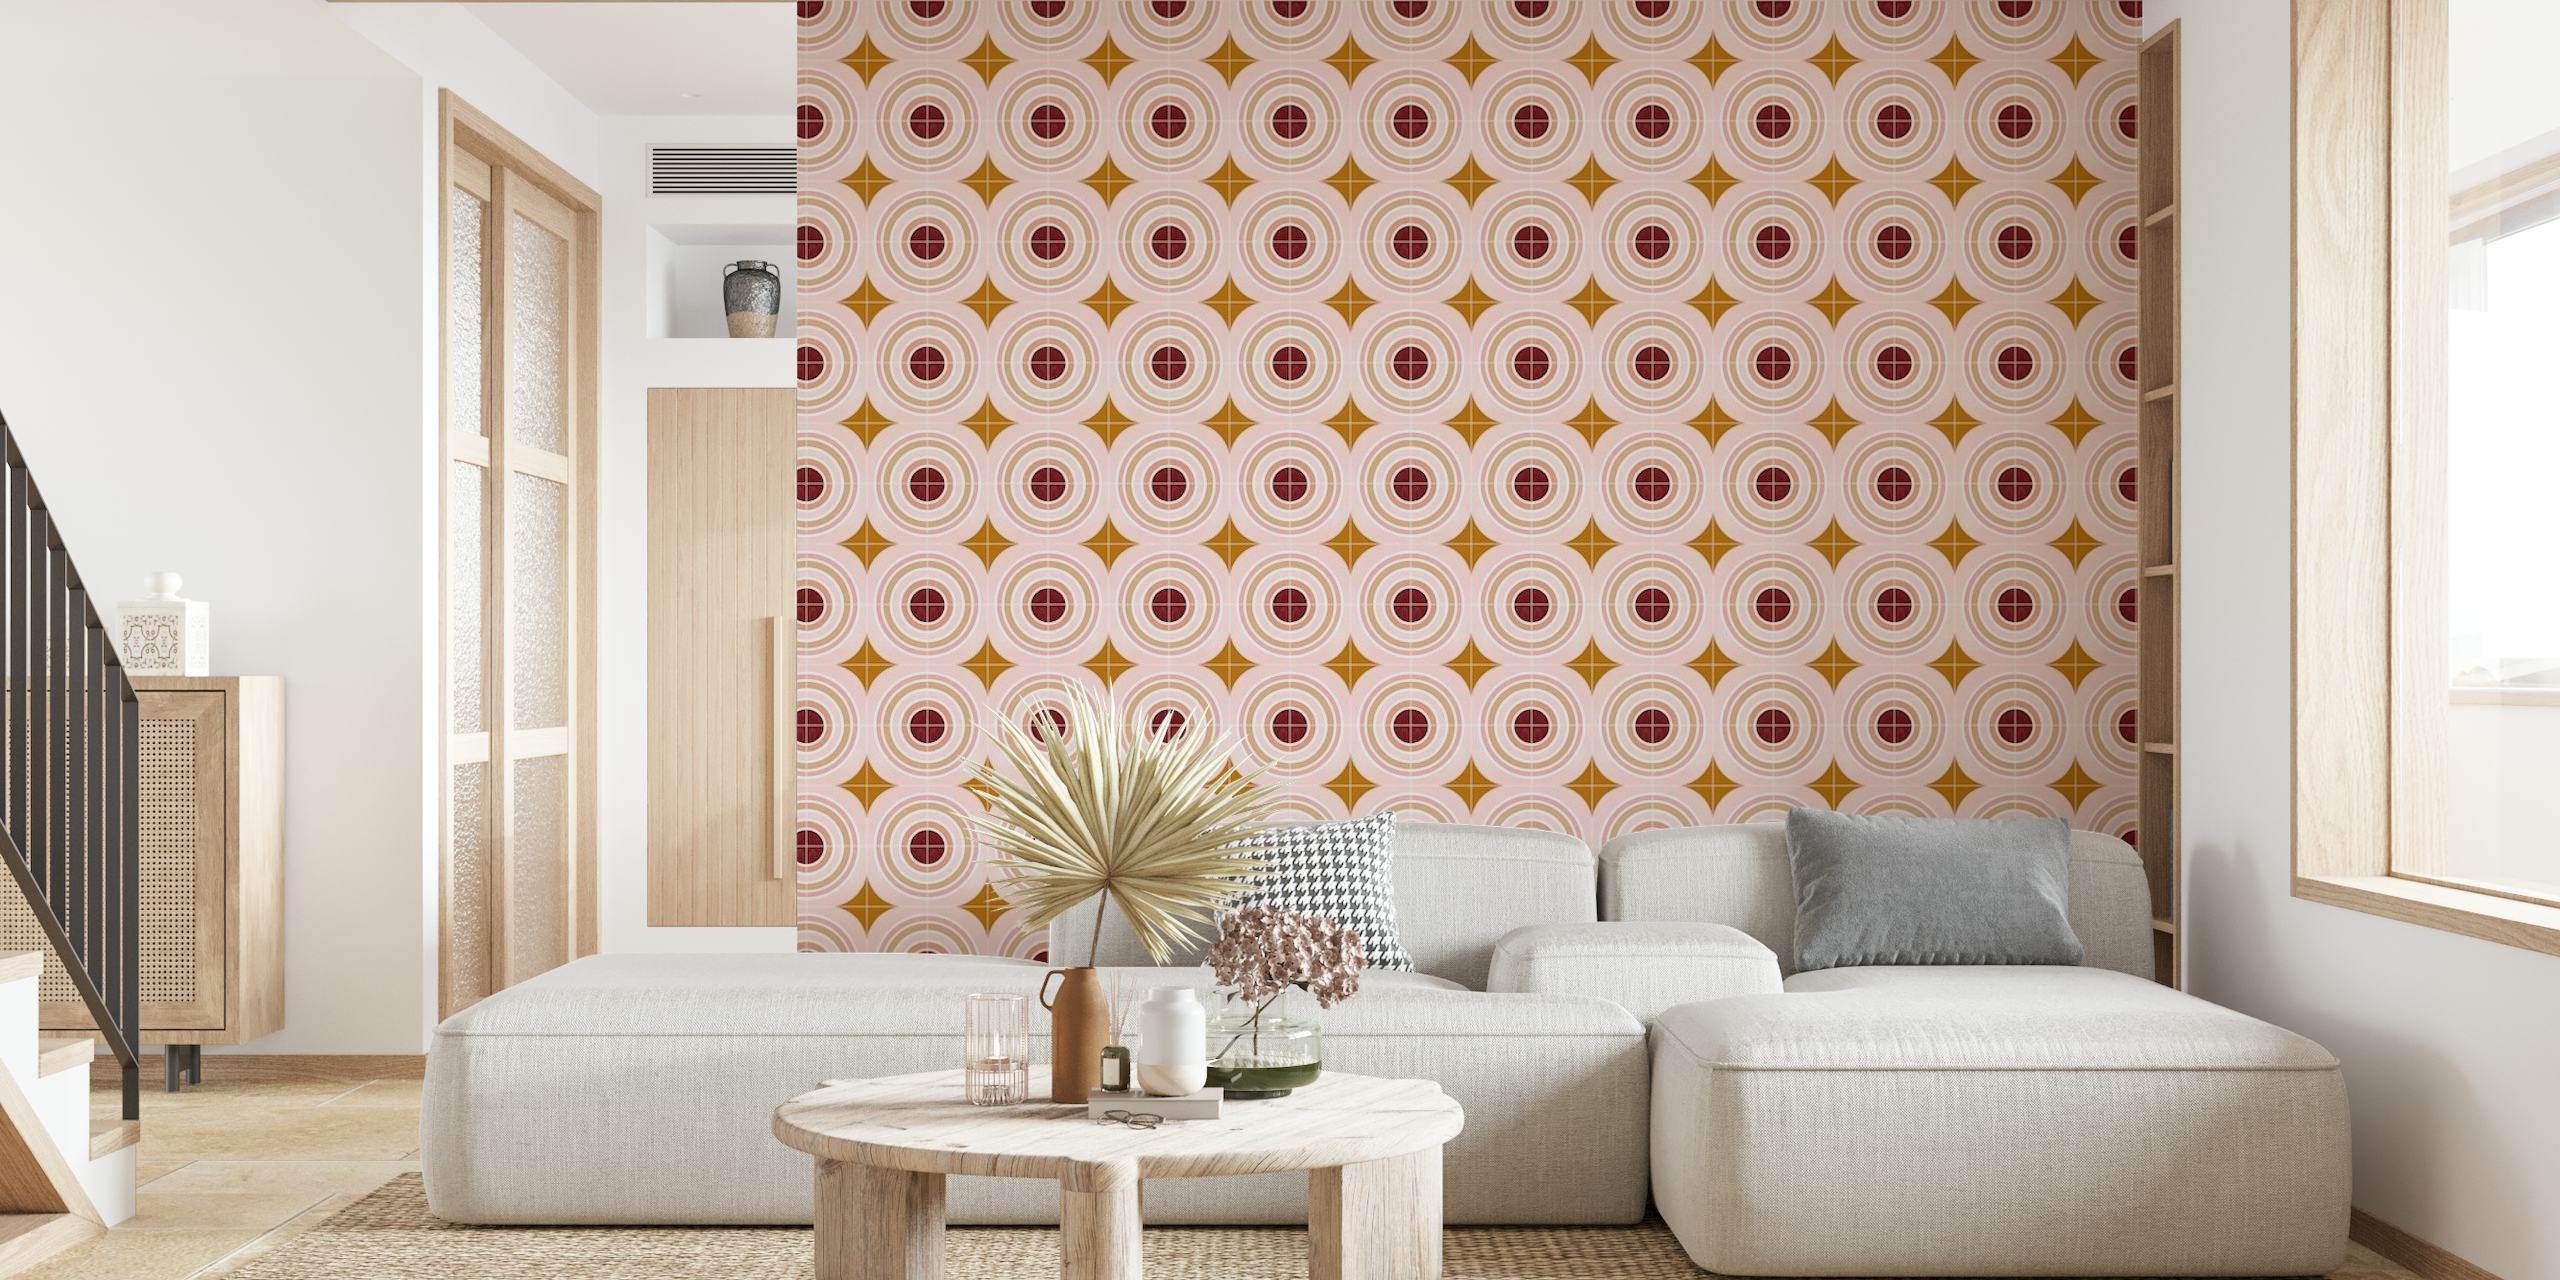 Target Tiles wall mural featuring concentric circle patterns in soft pink and gold hues